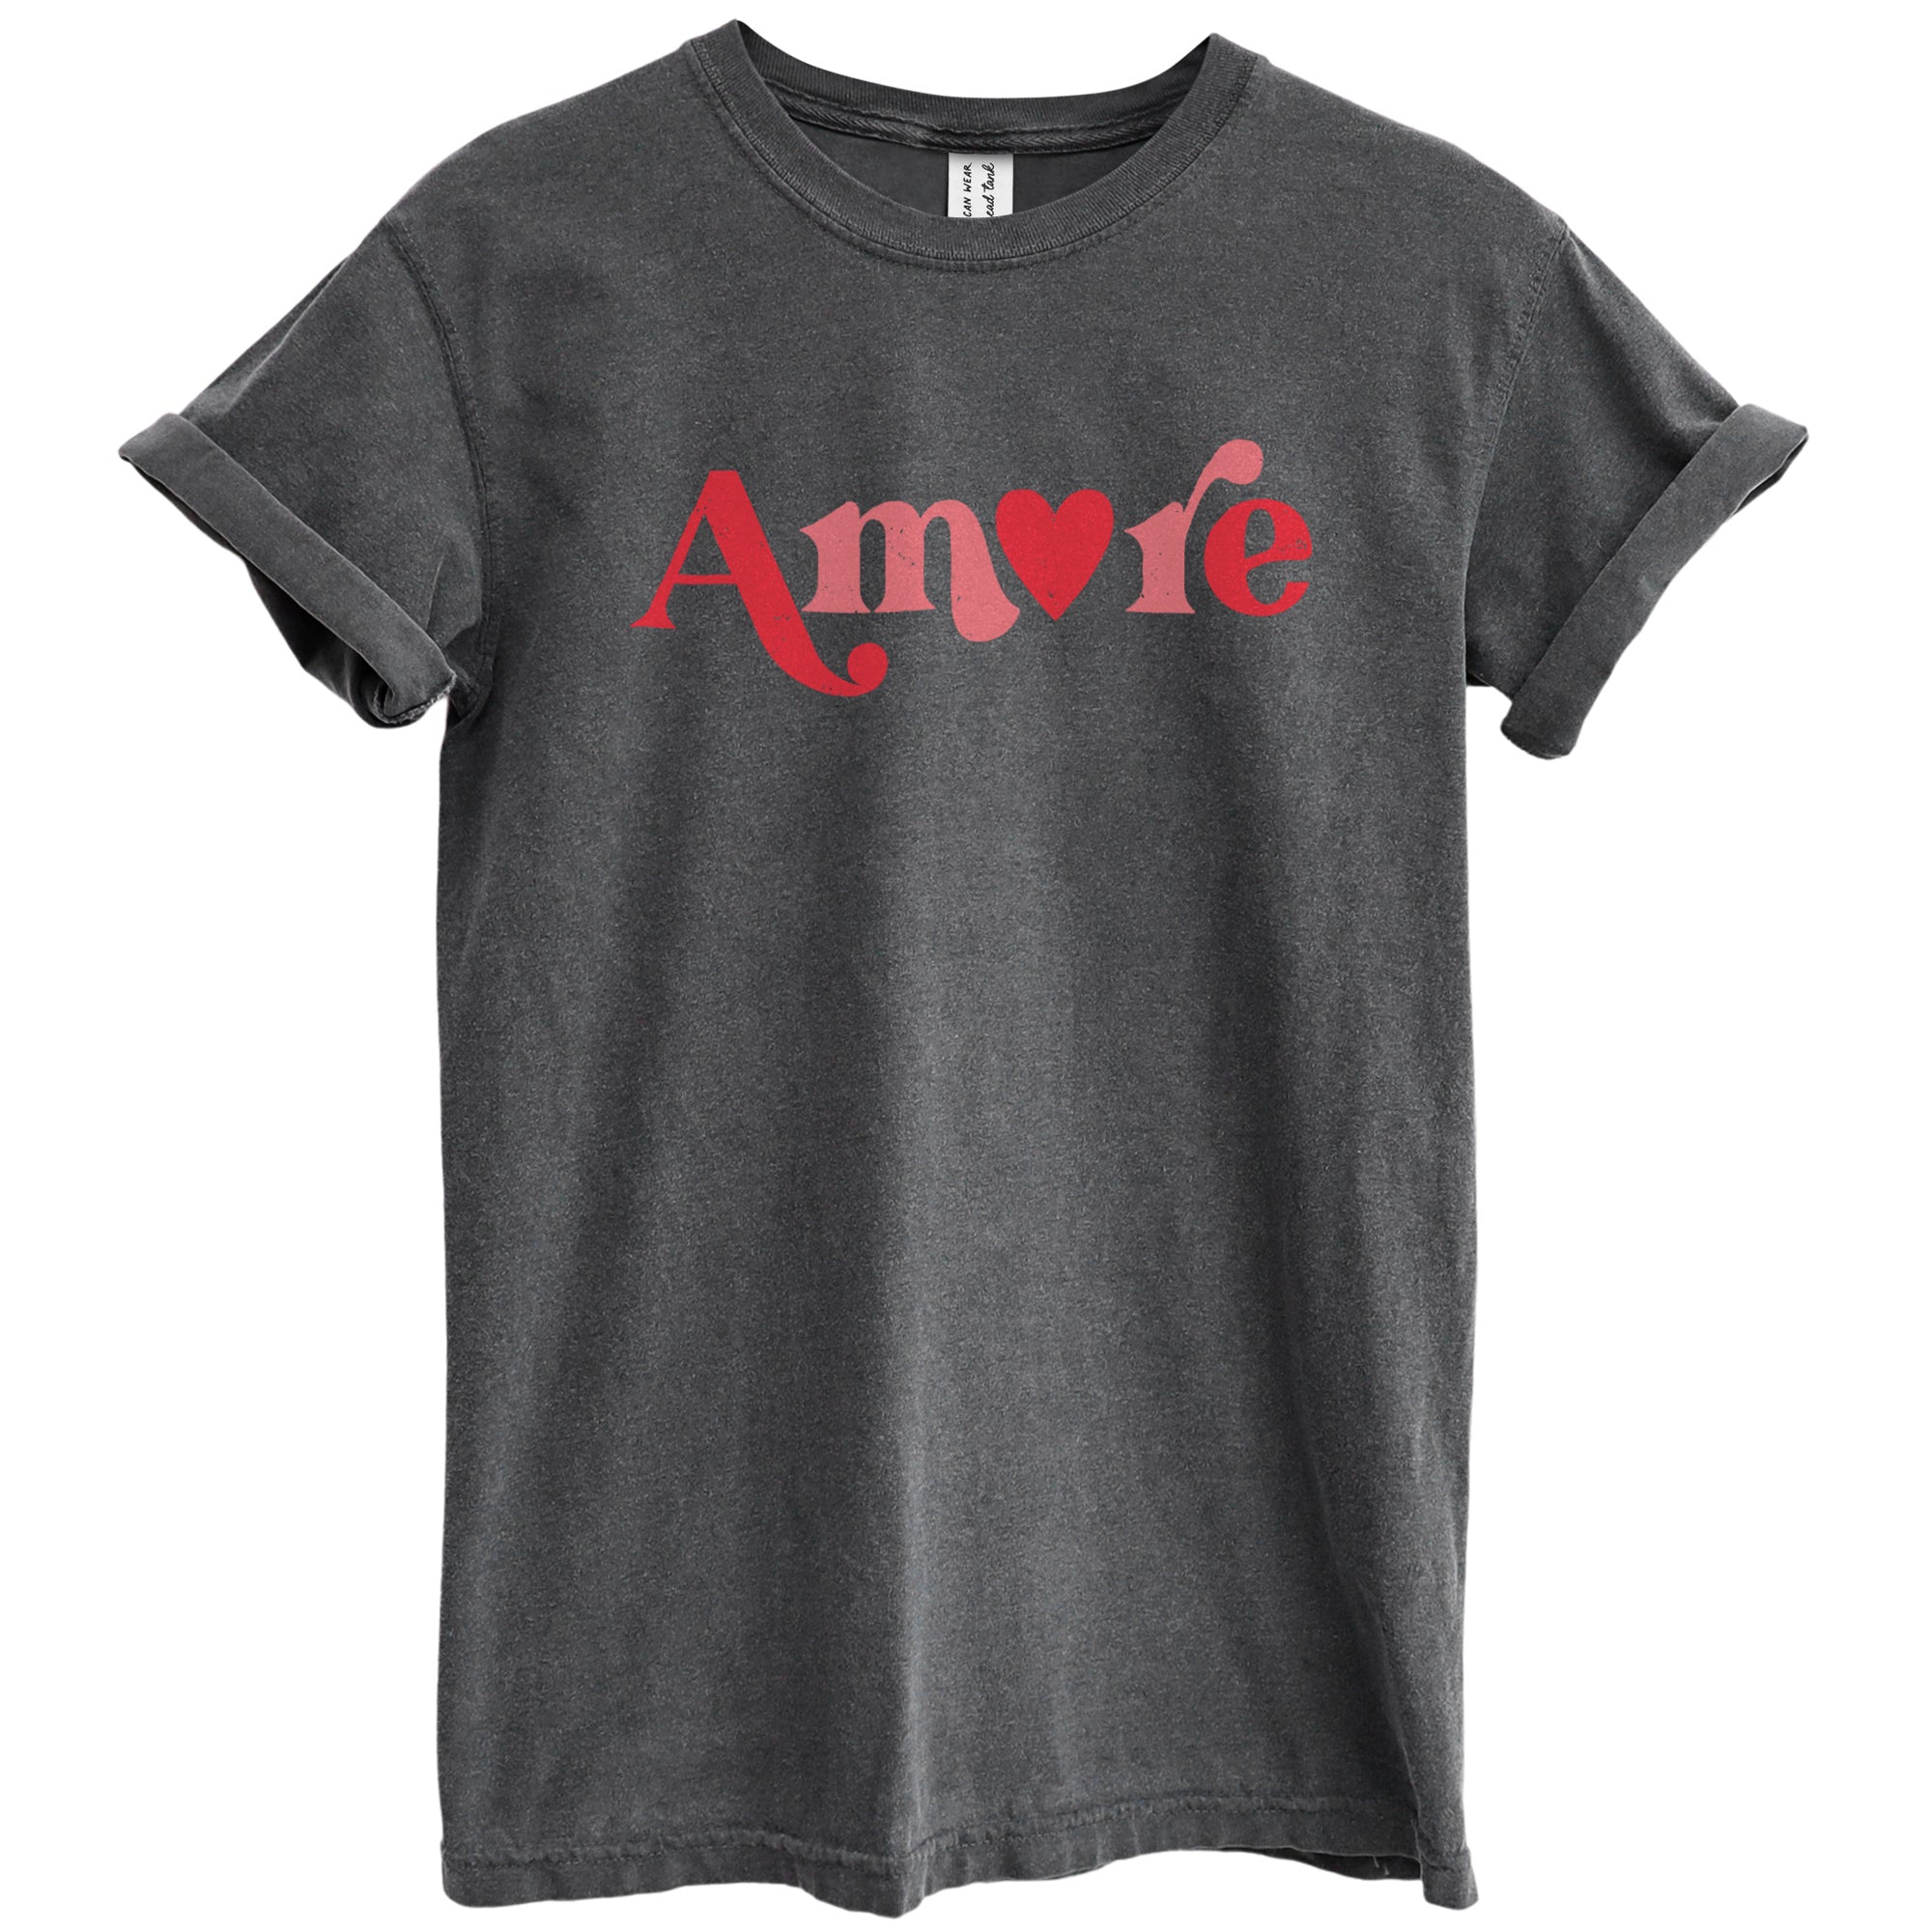 Amore Valentines Shirt Garment-Dyed Tee